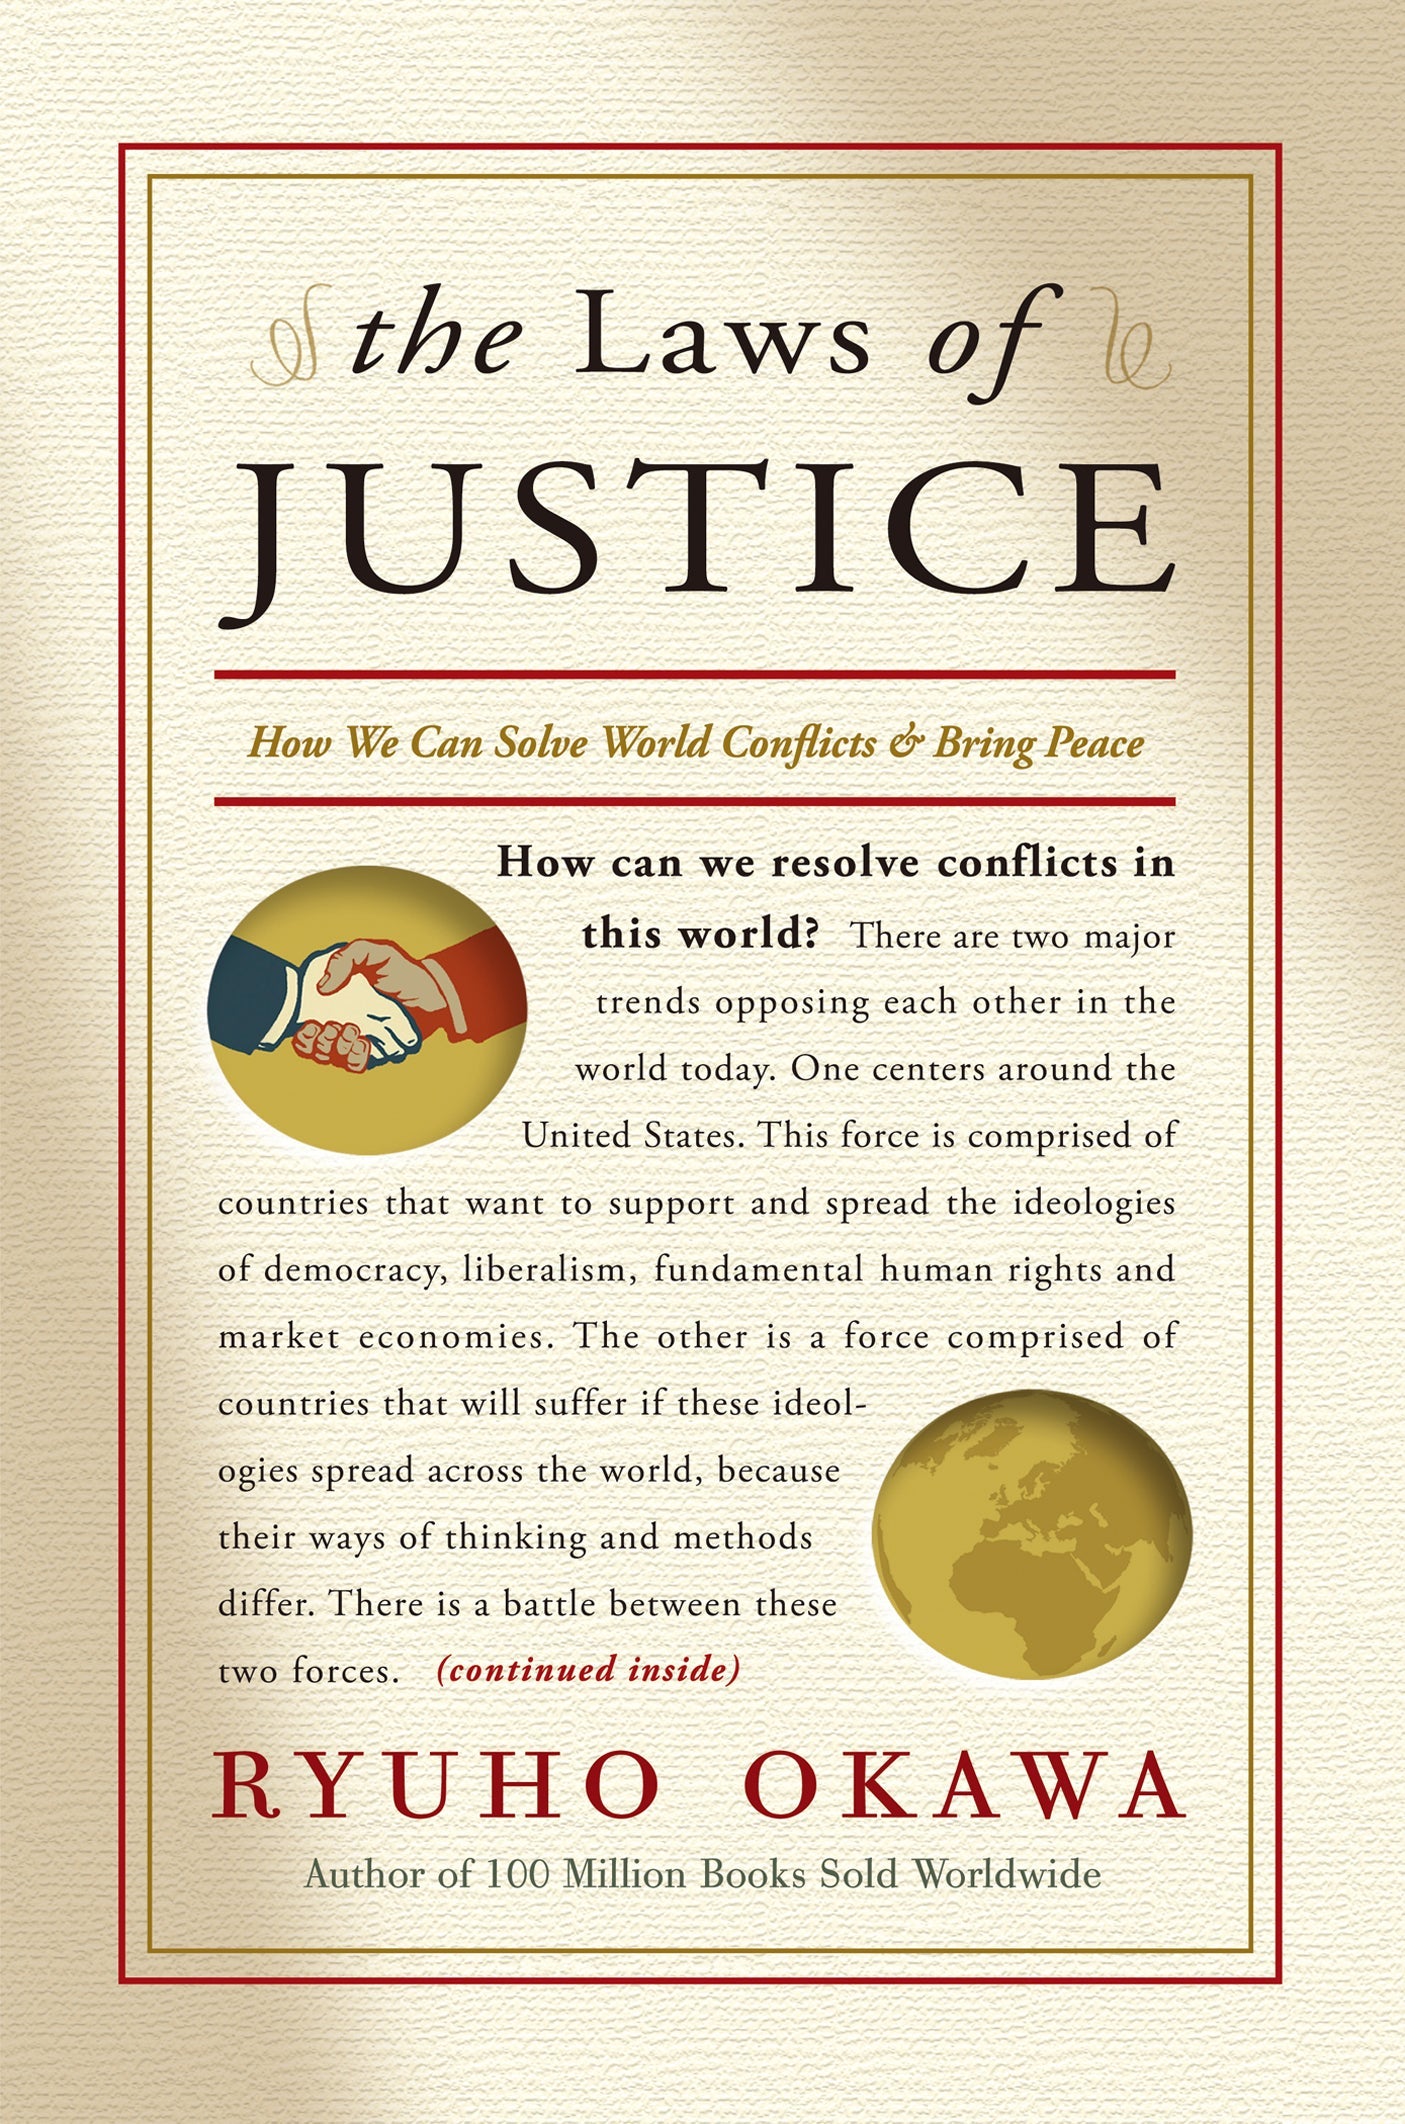 The Laws of Justice : How We Can Solve World Conflicts and Bring Peace, Ryuho Okawa, English - IRH Press International